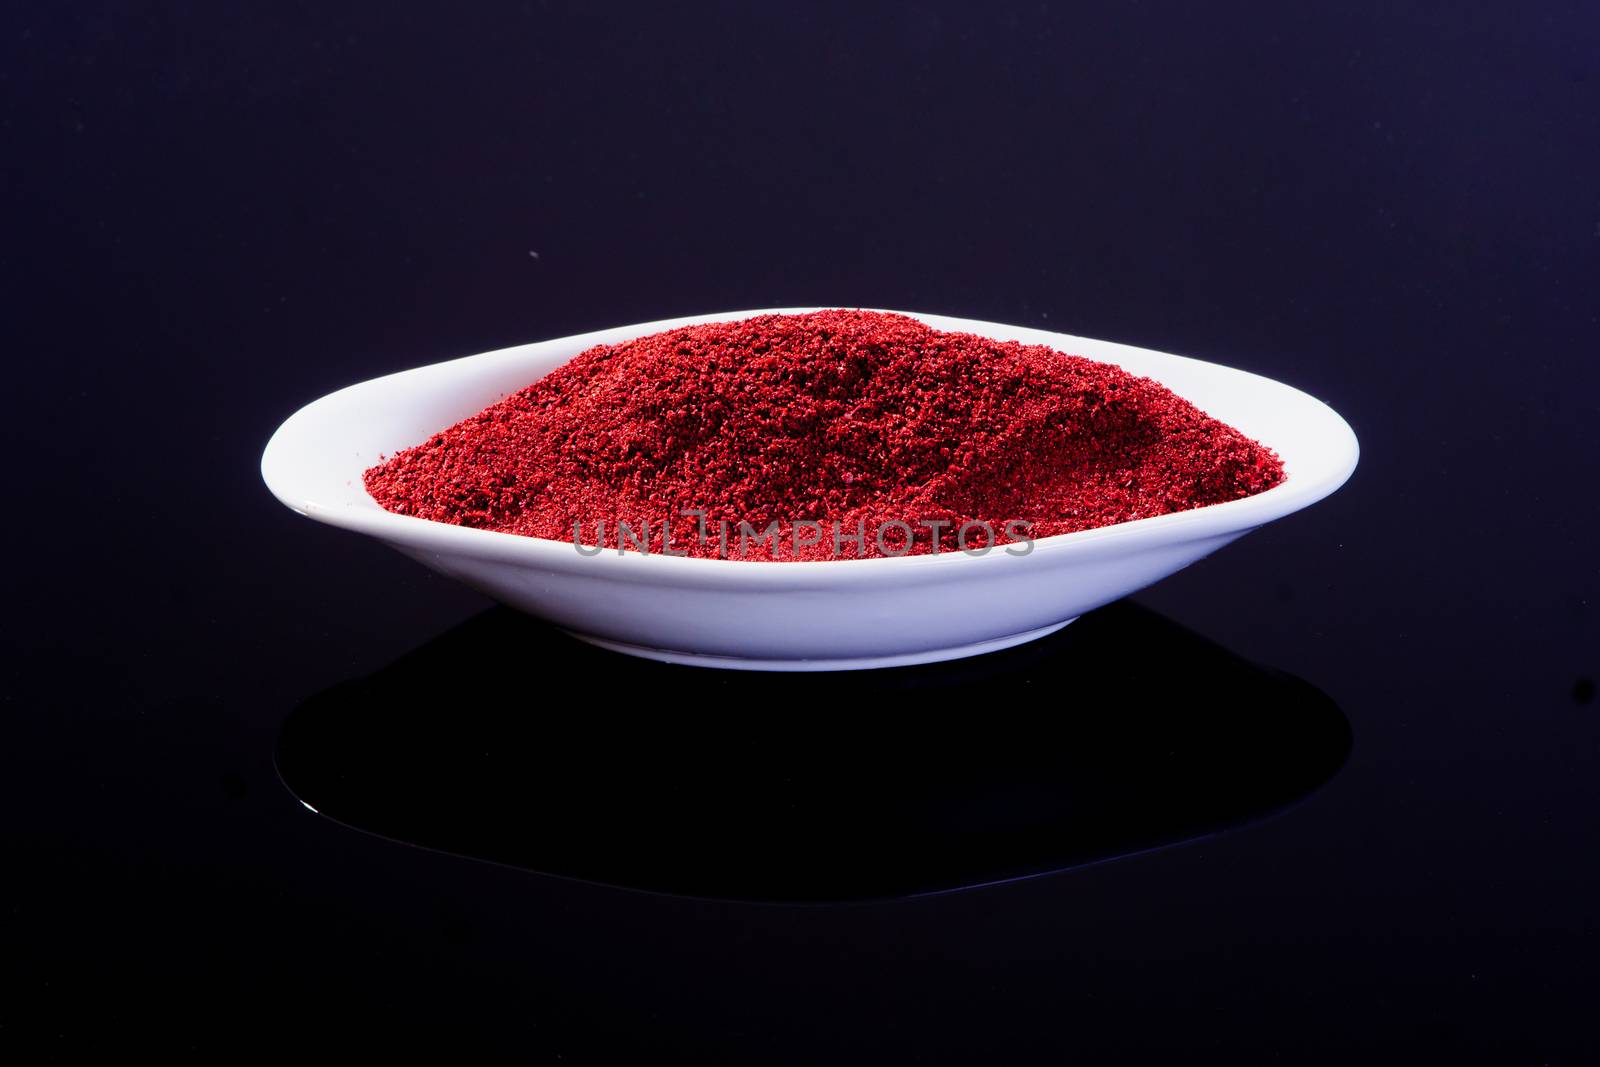 Sumac in a white plate on black background